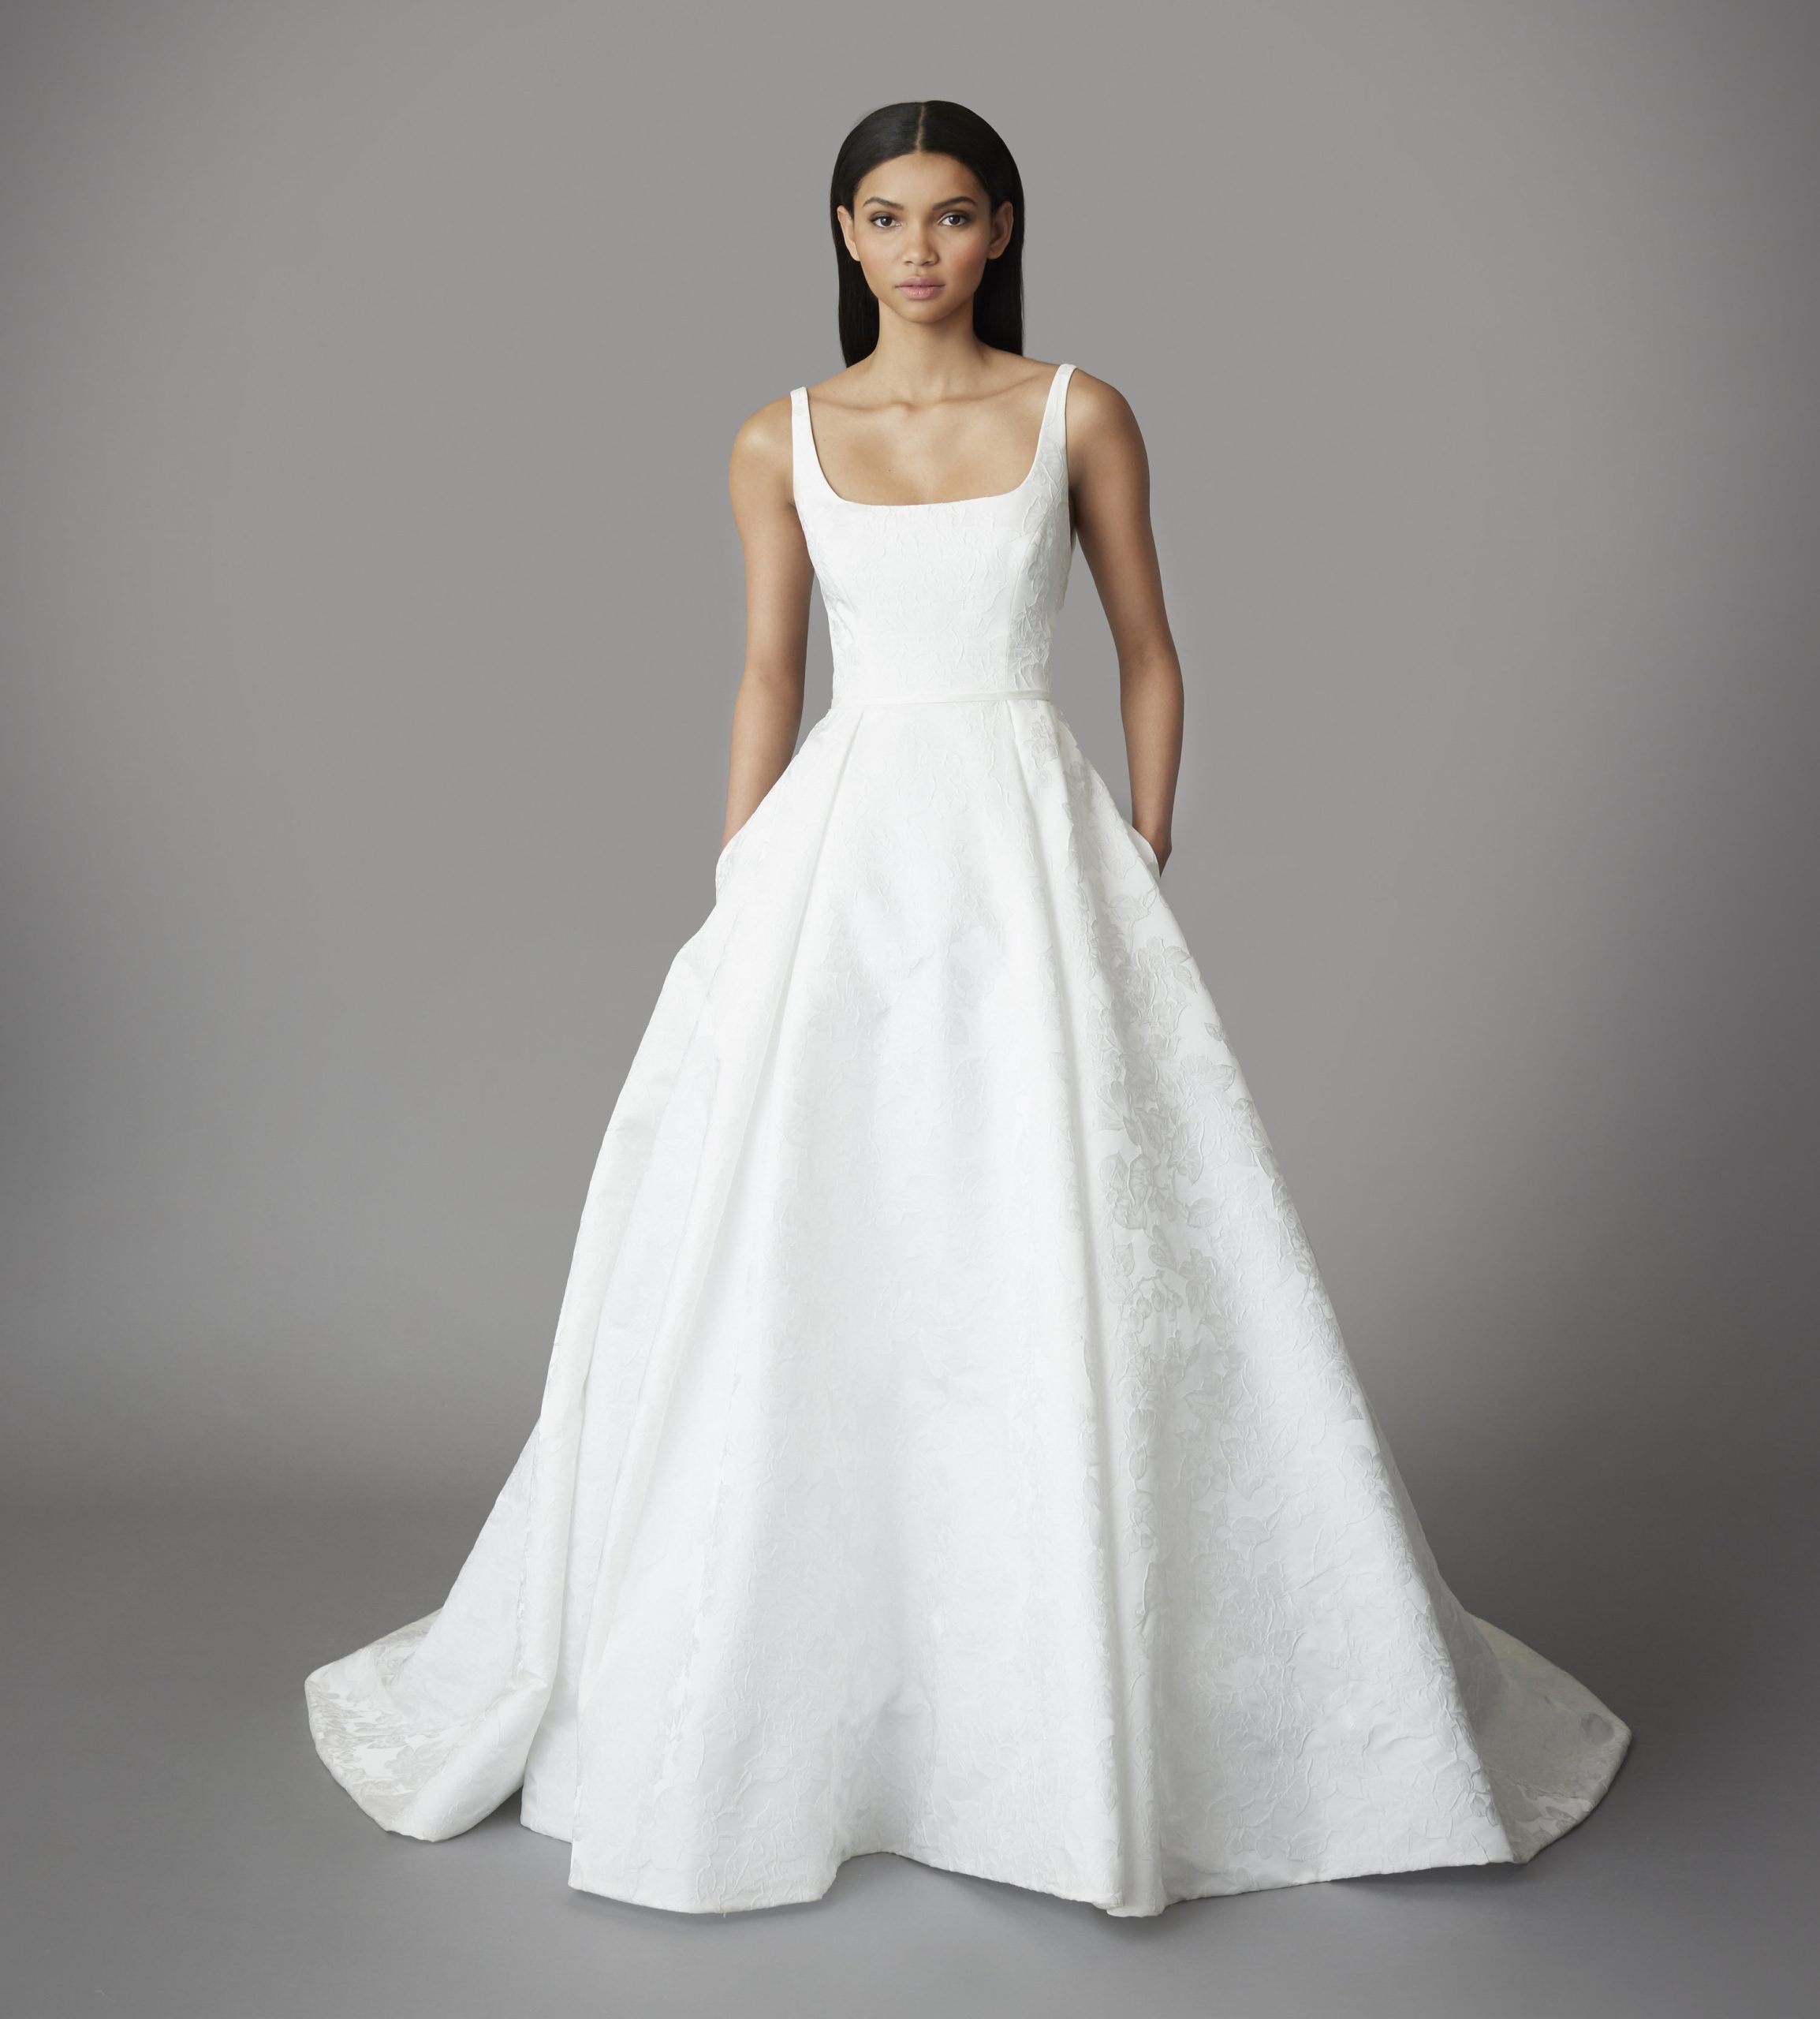 Sleeveless Ball Gown Wedding Dress With Back Bow by Allison Webb - Image 1